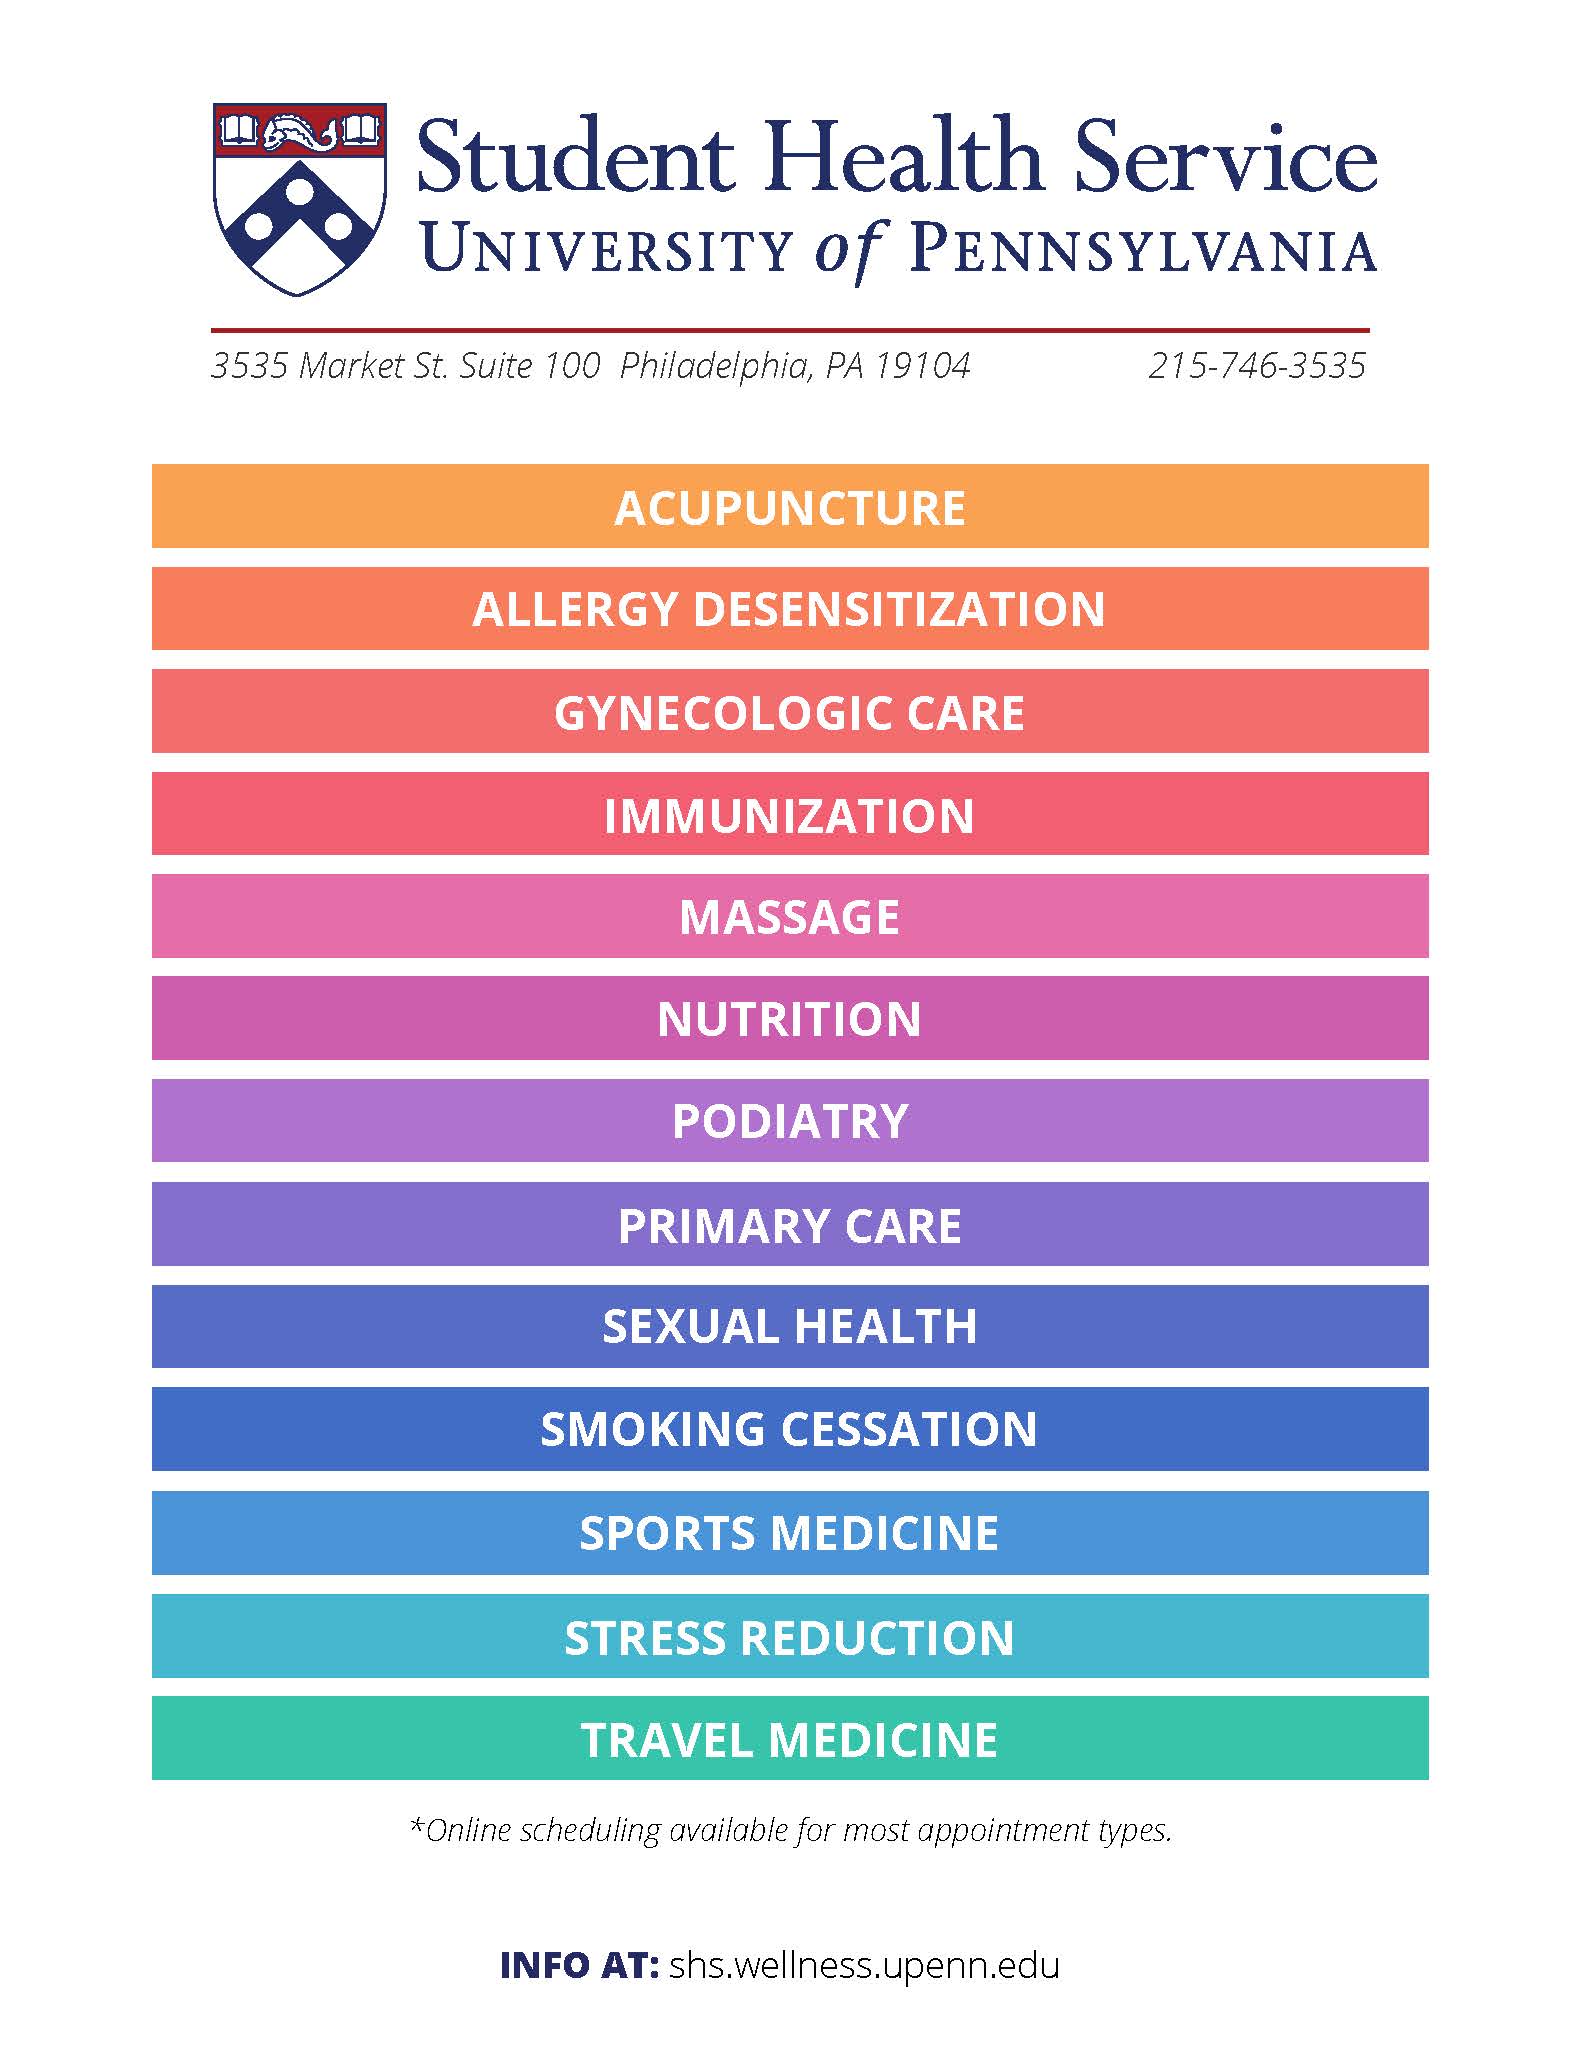 Colorful list of Student Health Services 